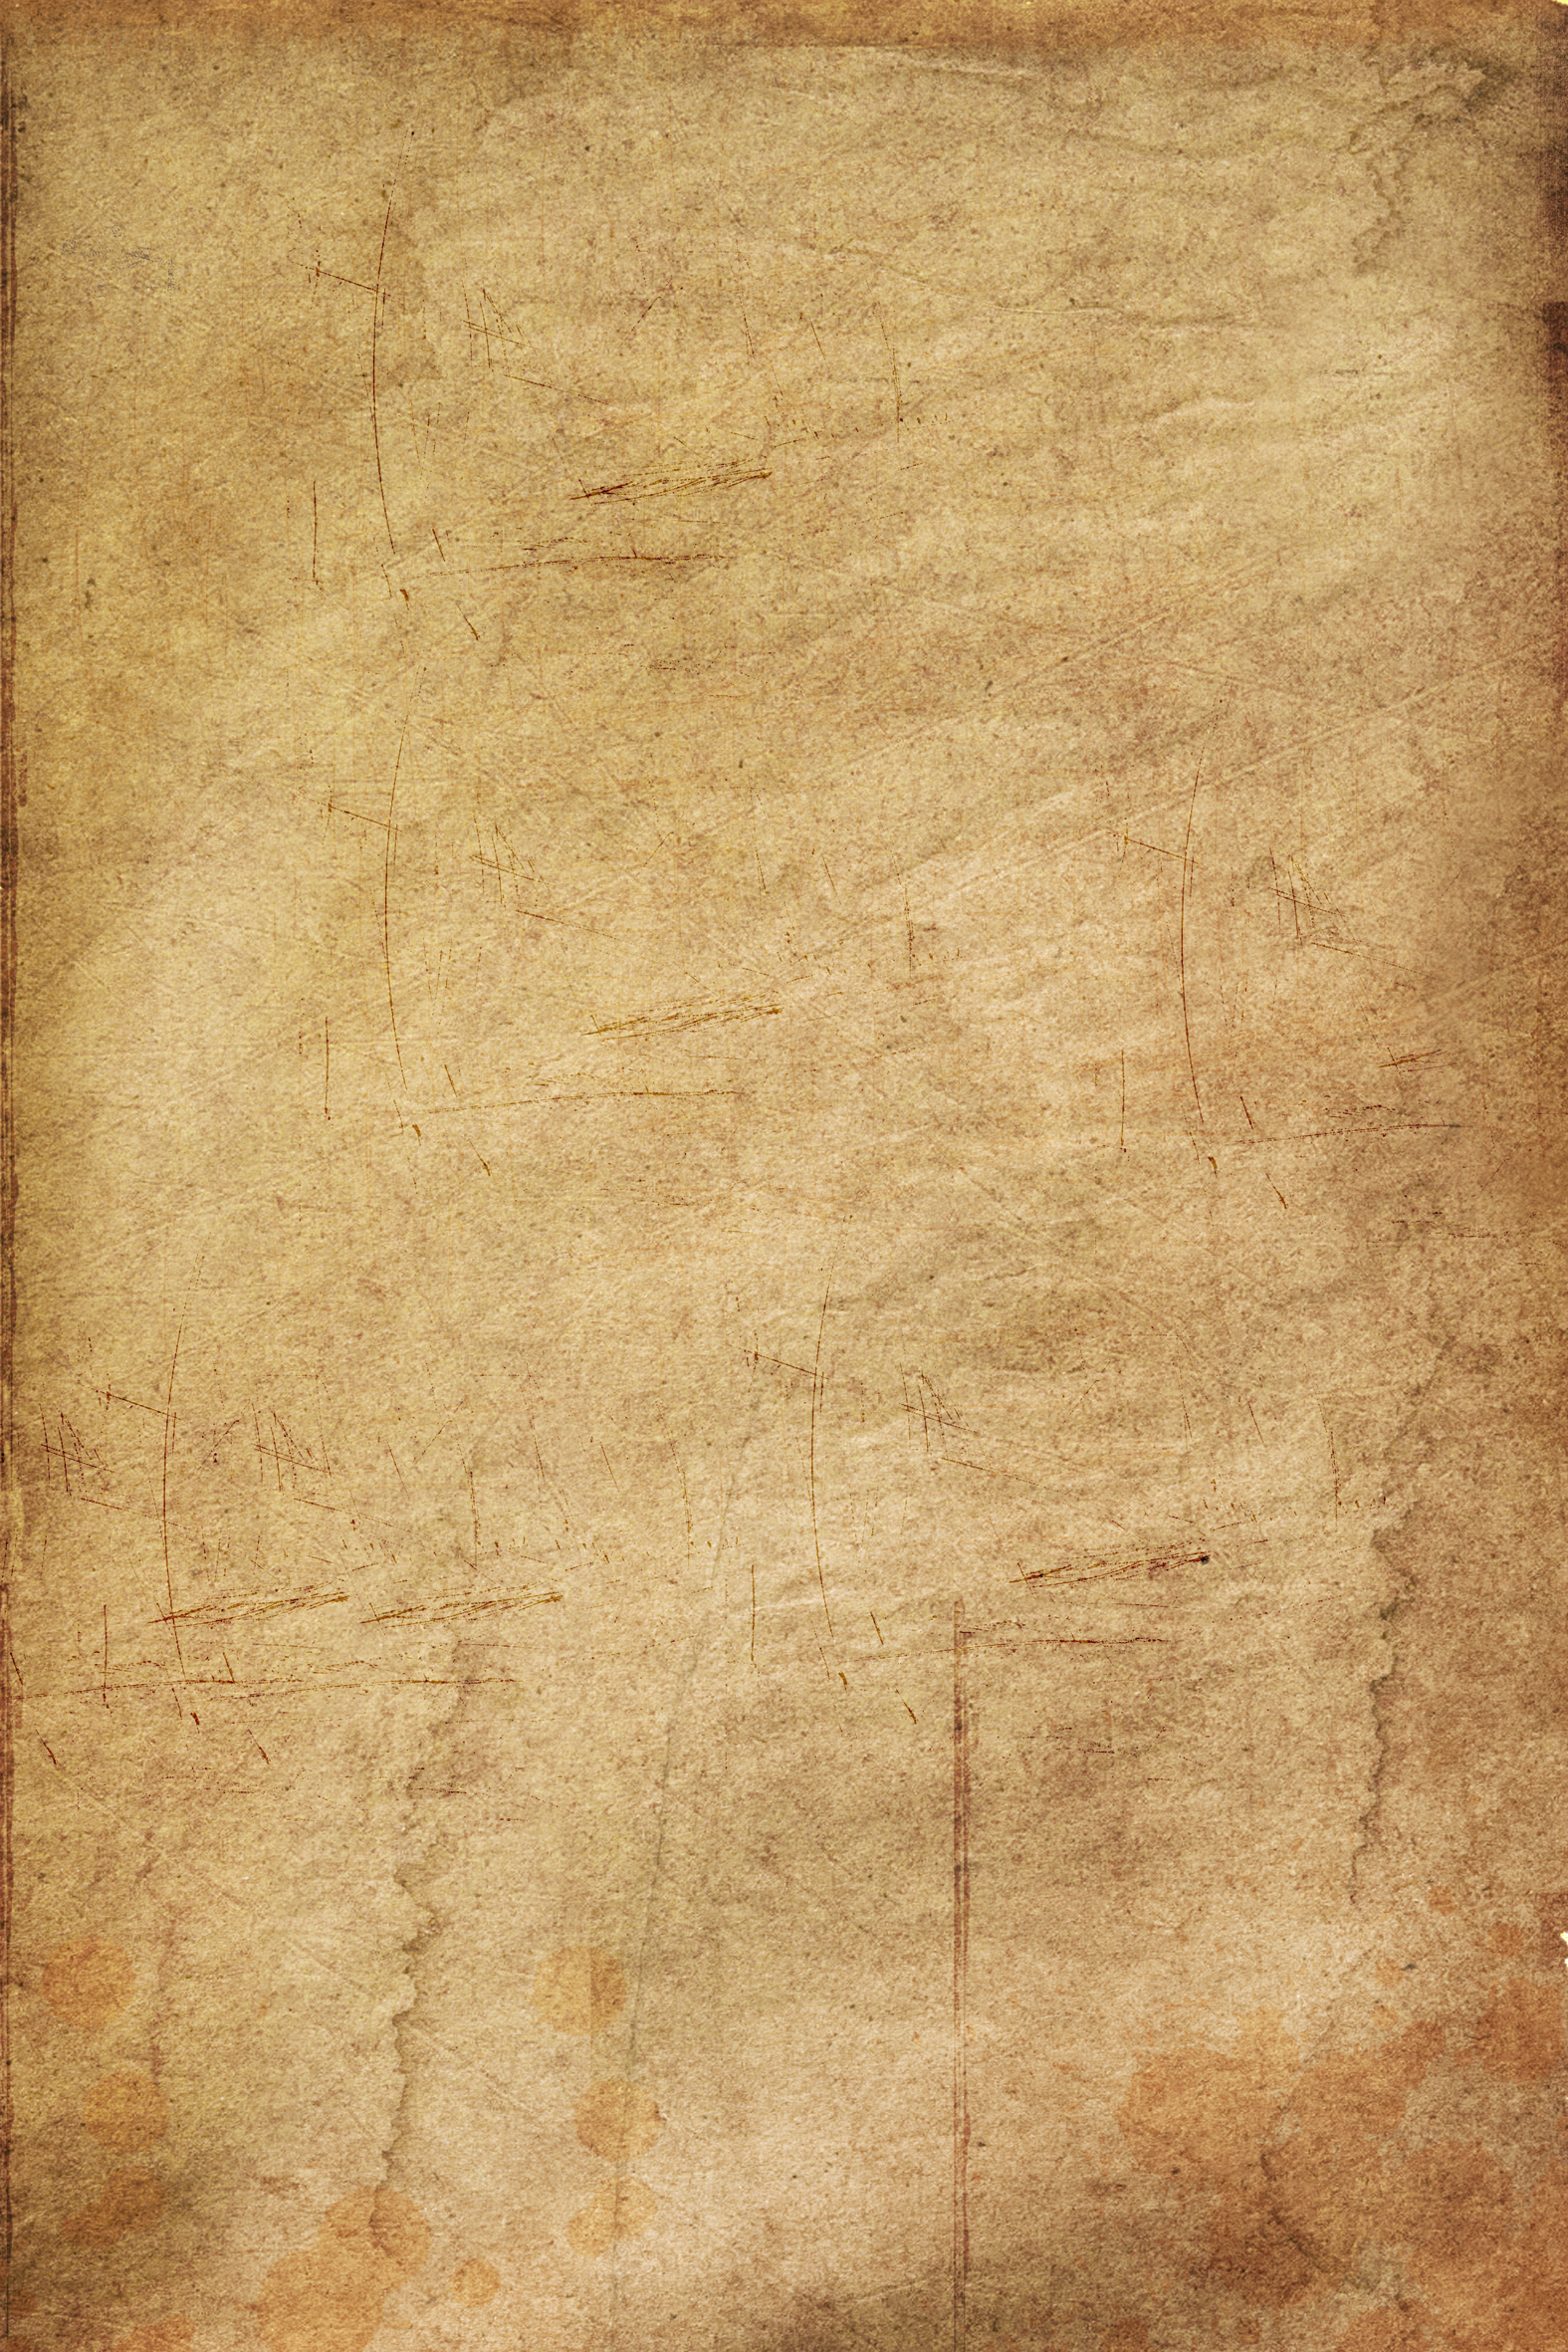 paper texture background, free image